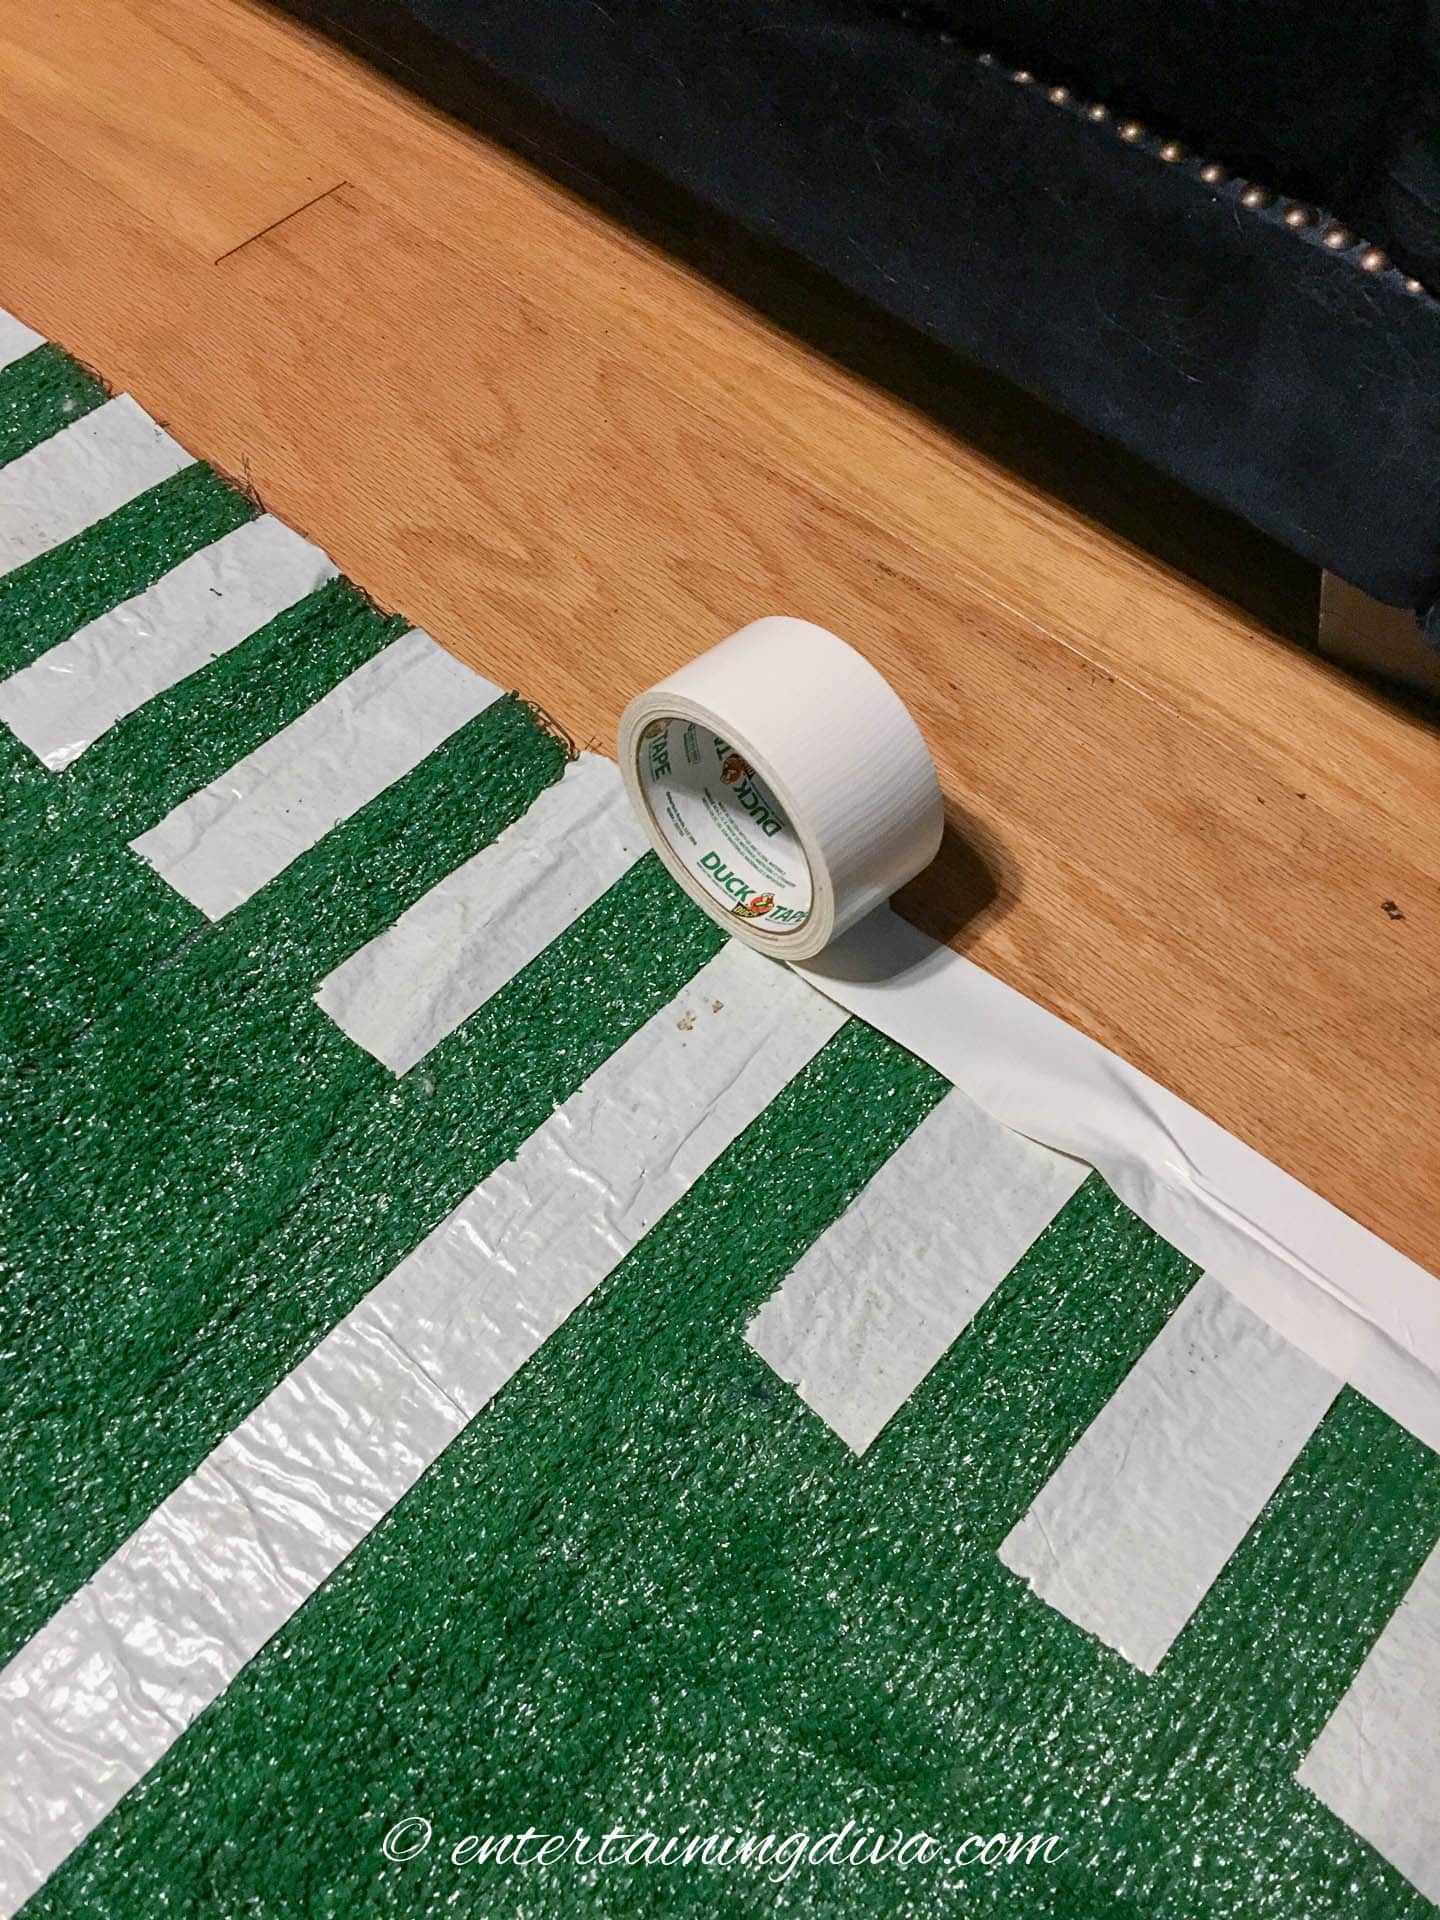 Taping the rug to the floor